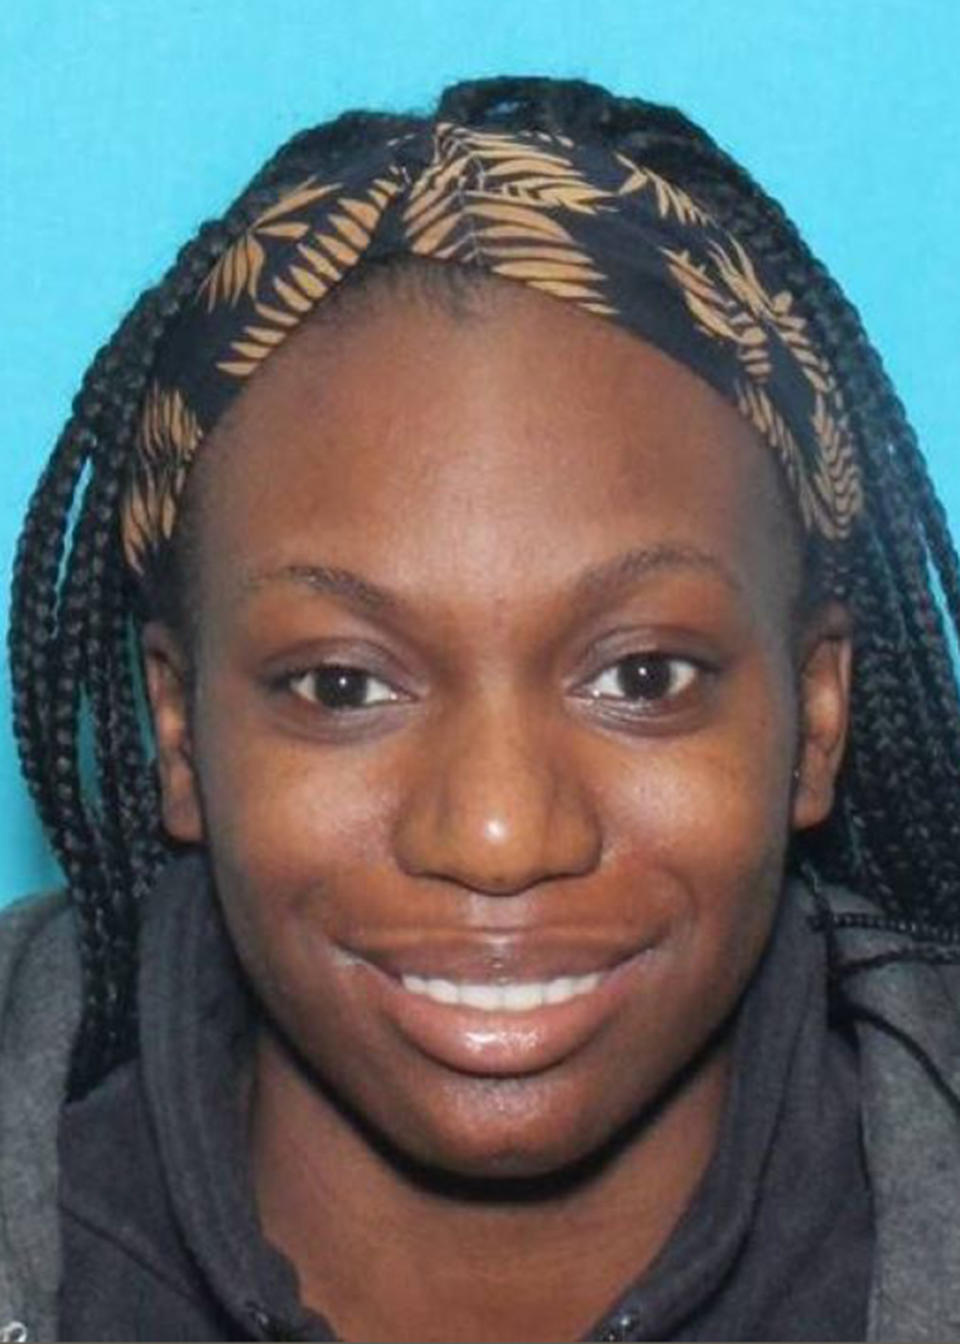 This image released by the Illinois State Police, shows Xandria A. Harris, one of two people authorities were searching for Thursday, Dec. 30 2021, who are believed to have been involved in the fatal shooting of one police officer and wounding of another at a northern Illinois hotel. (Illinois State Police via AP)